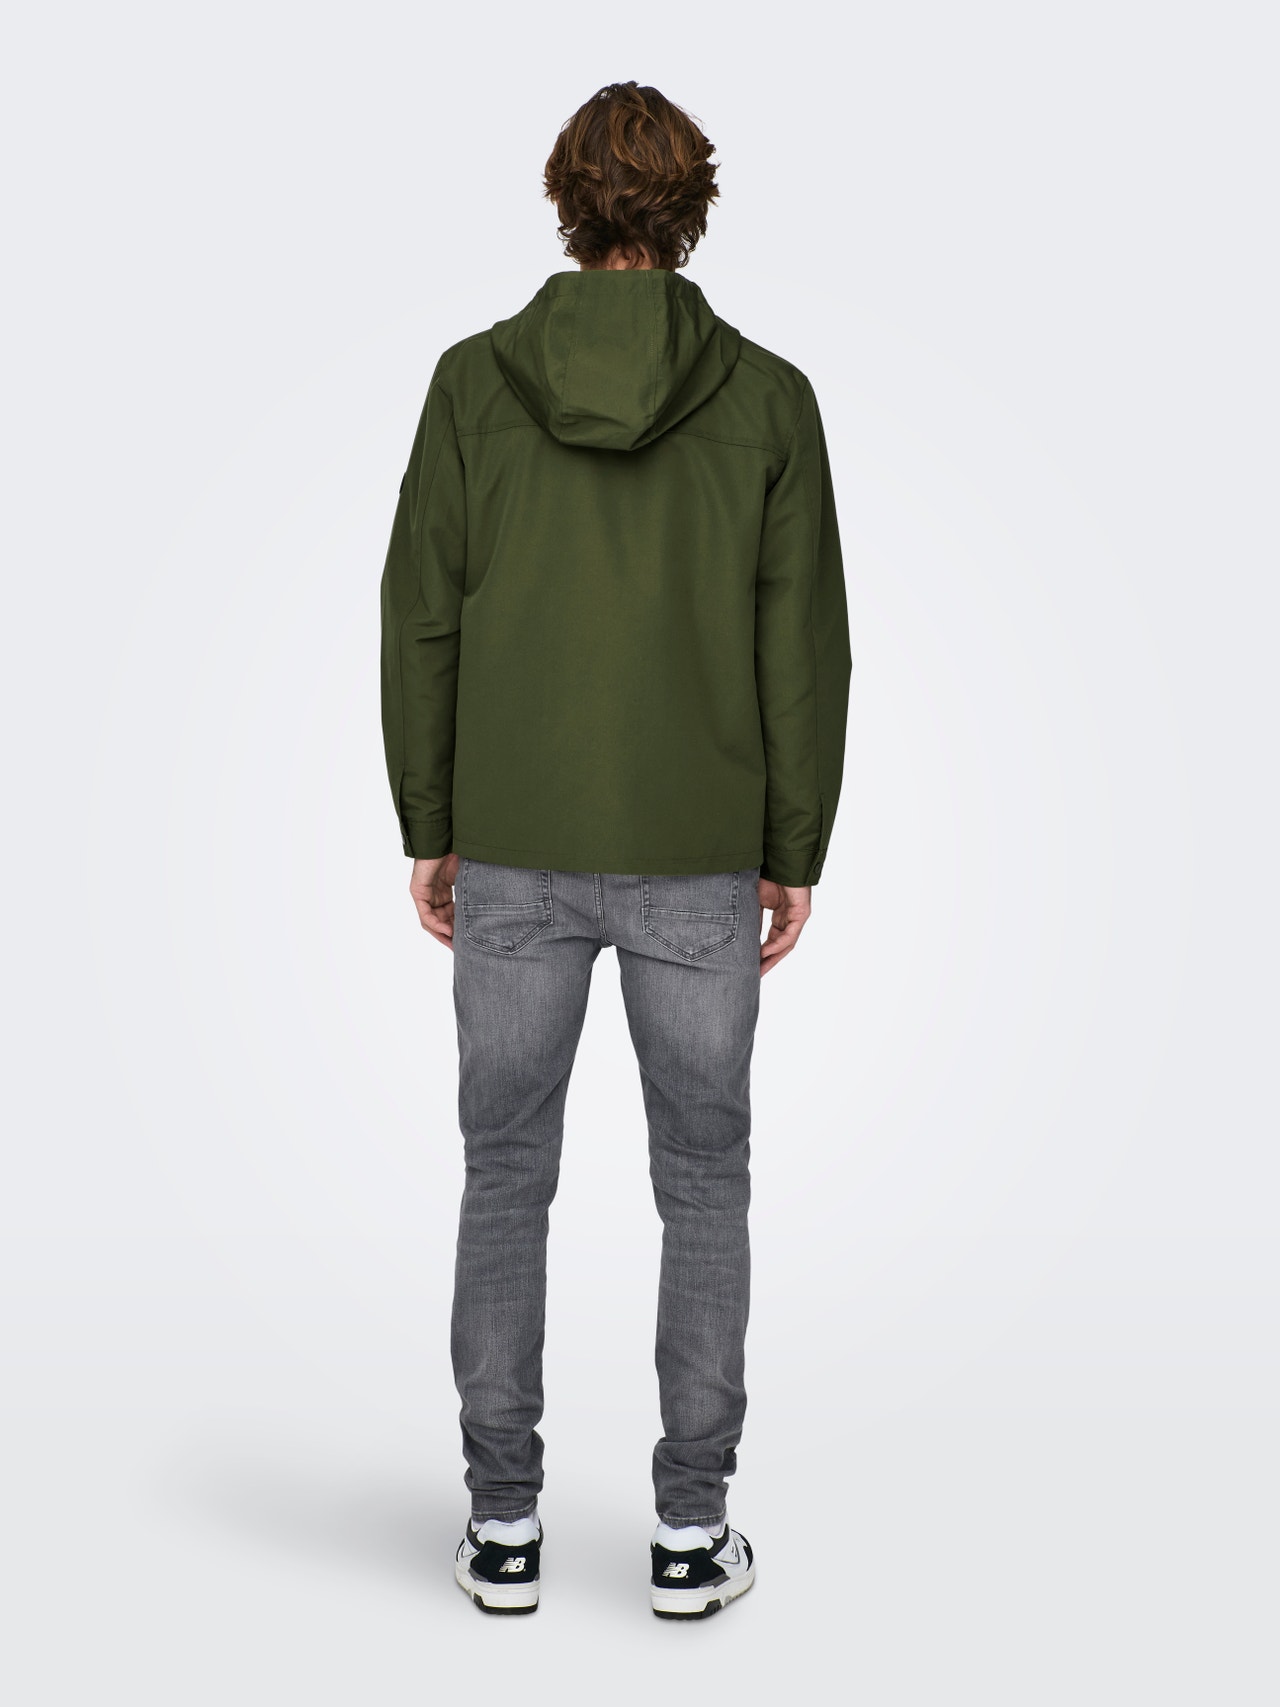 ONLY & SONS Jacket with hood -Olive Night - 22024156